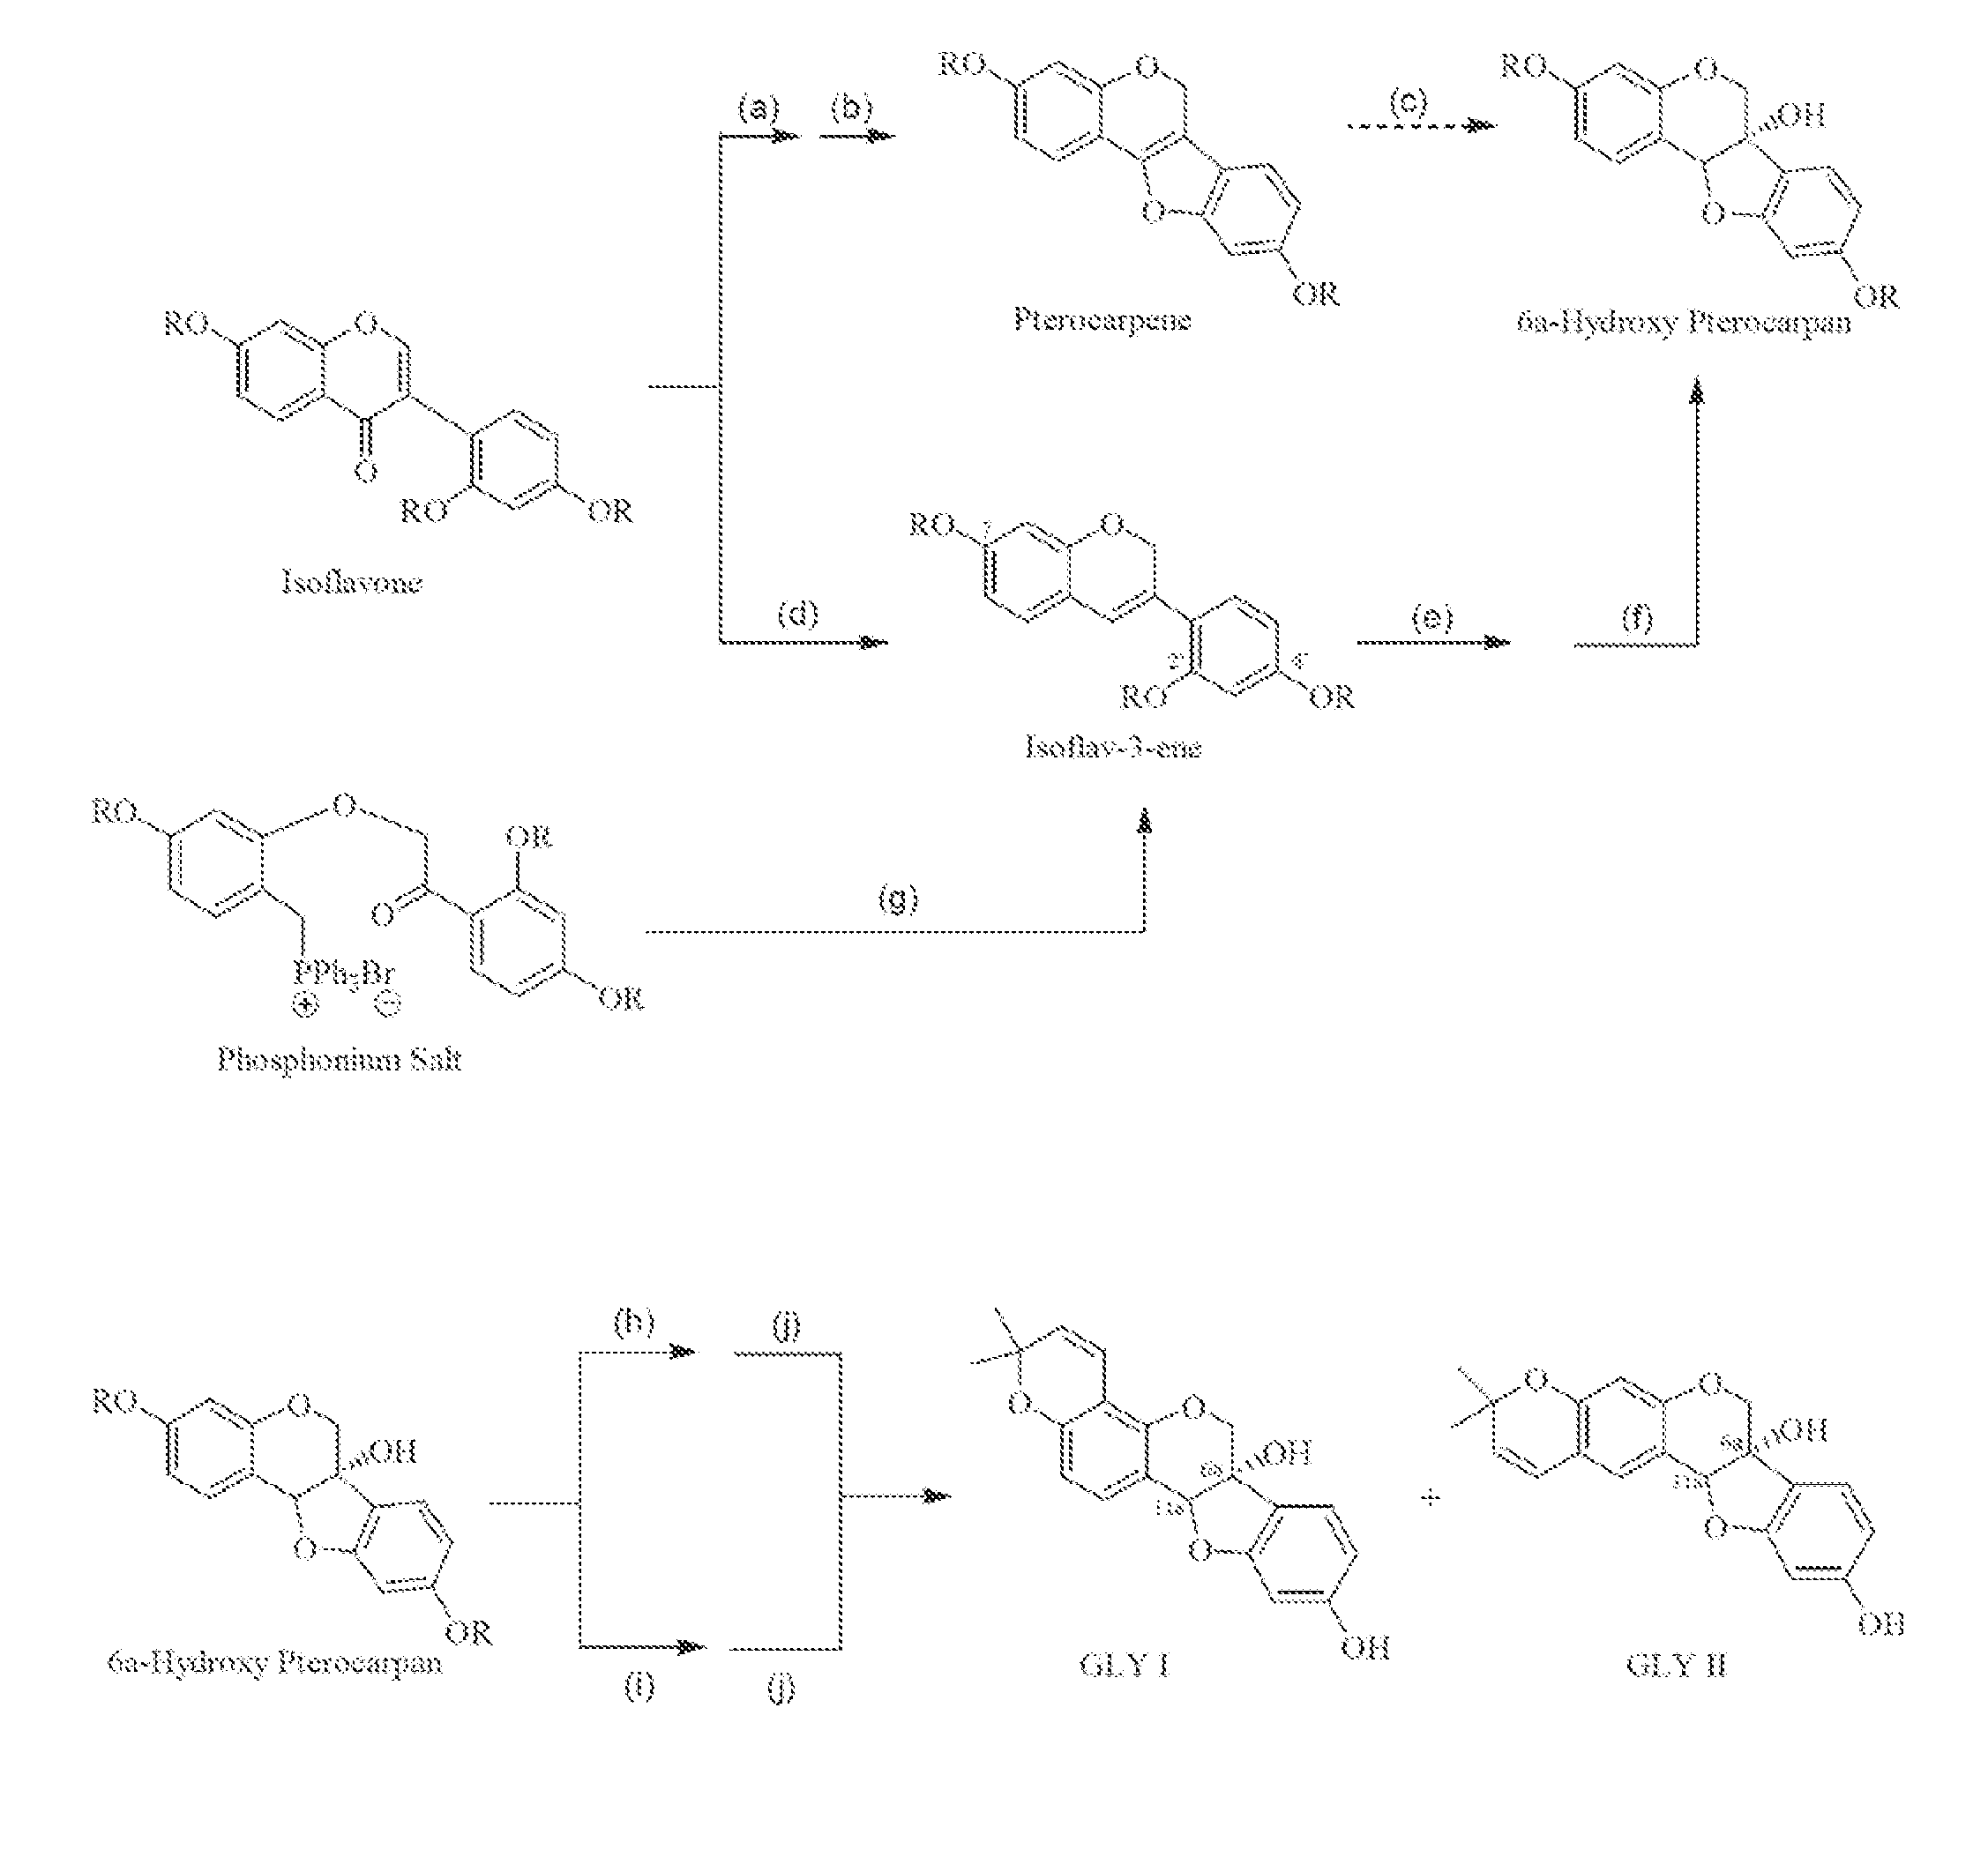 Methods for synthesizing glycinols, glyceollins i and ii, compositions of selected intermediates, and therapeutic uses thereof